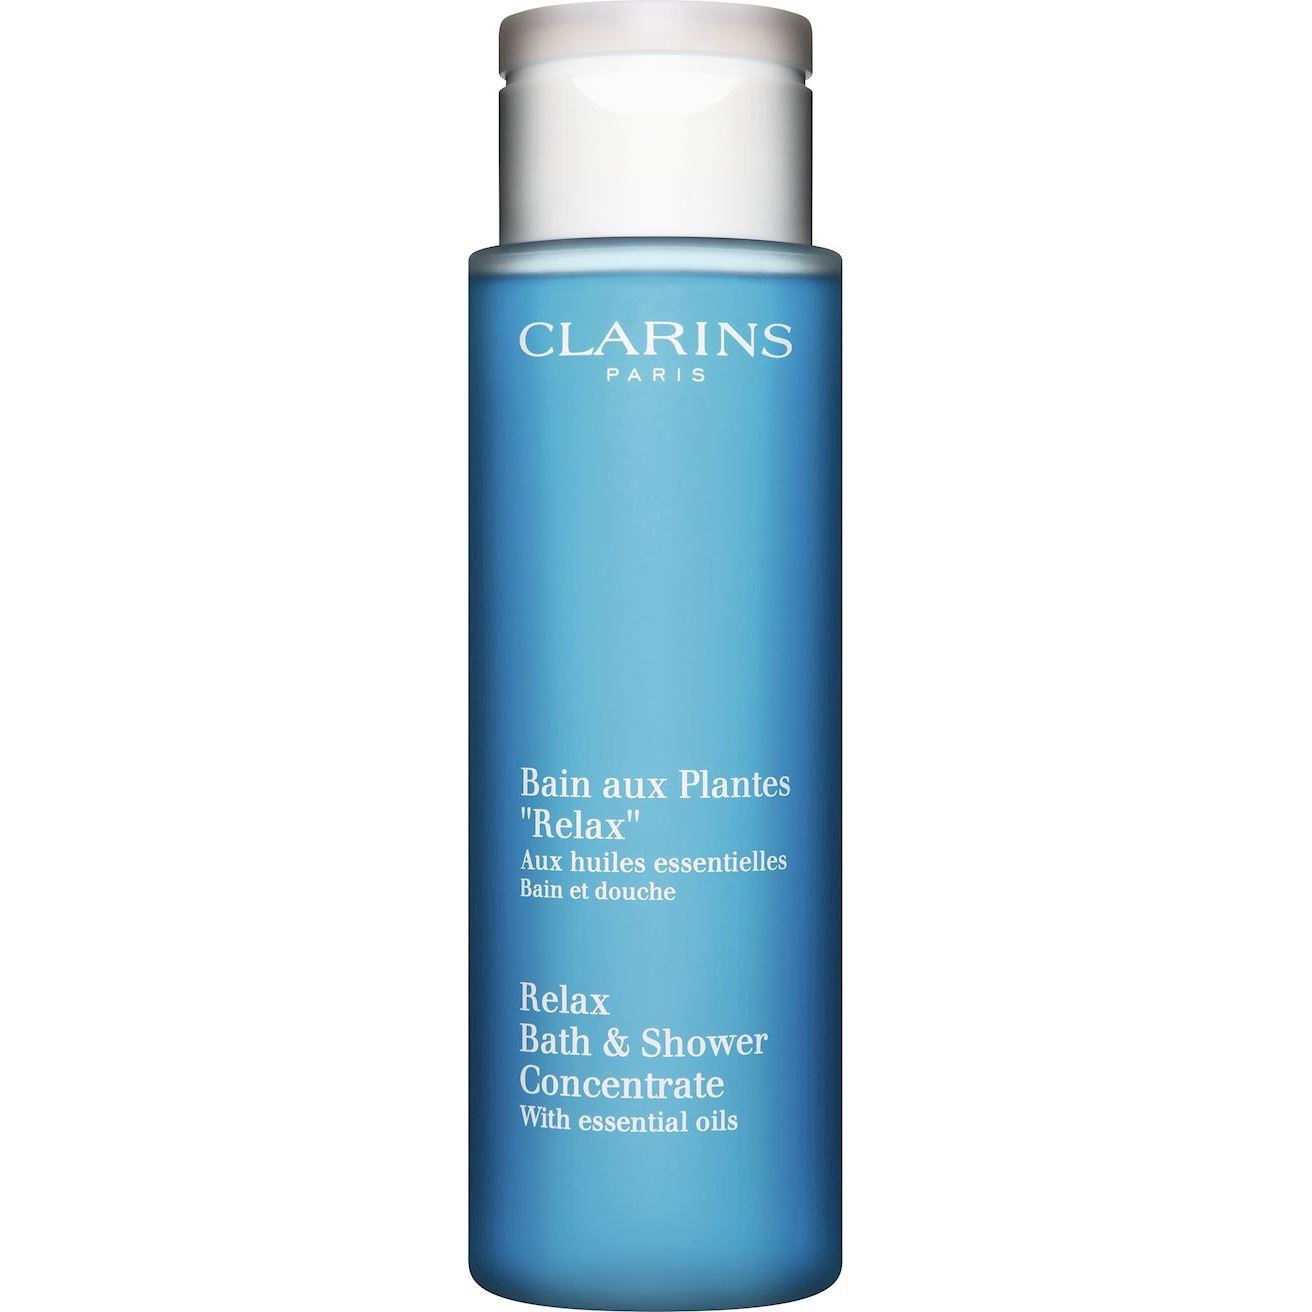 Clarins Daily Relax Bath & Shower Concentrate 200 ml.